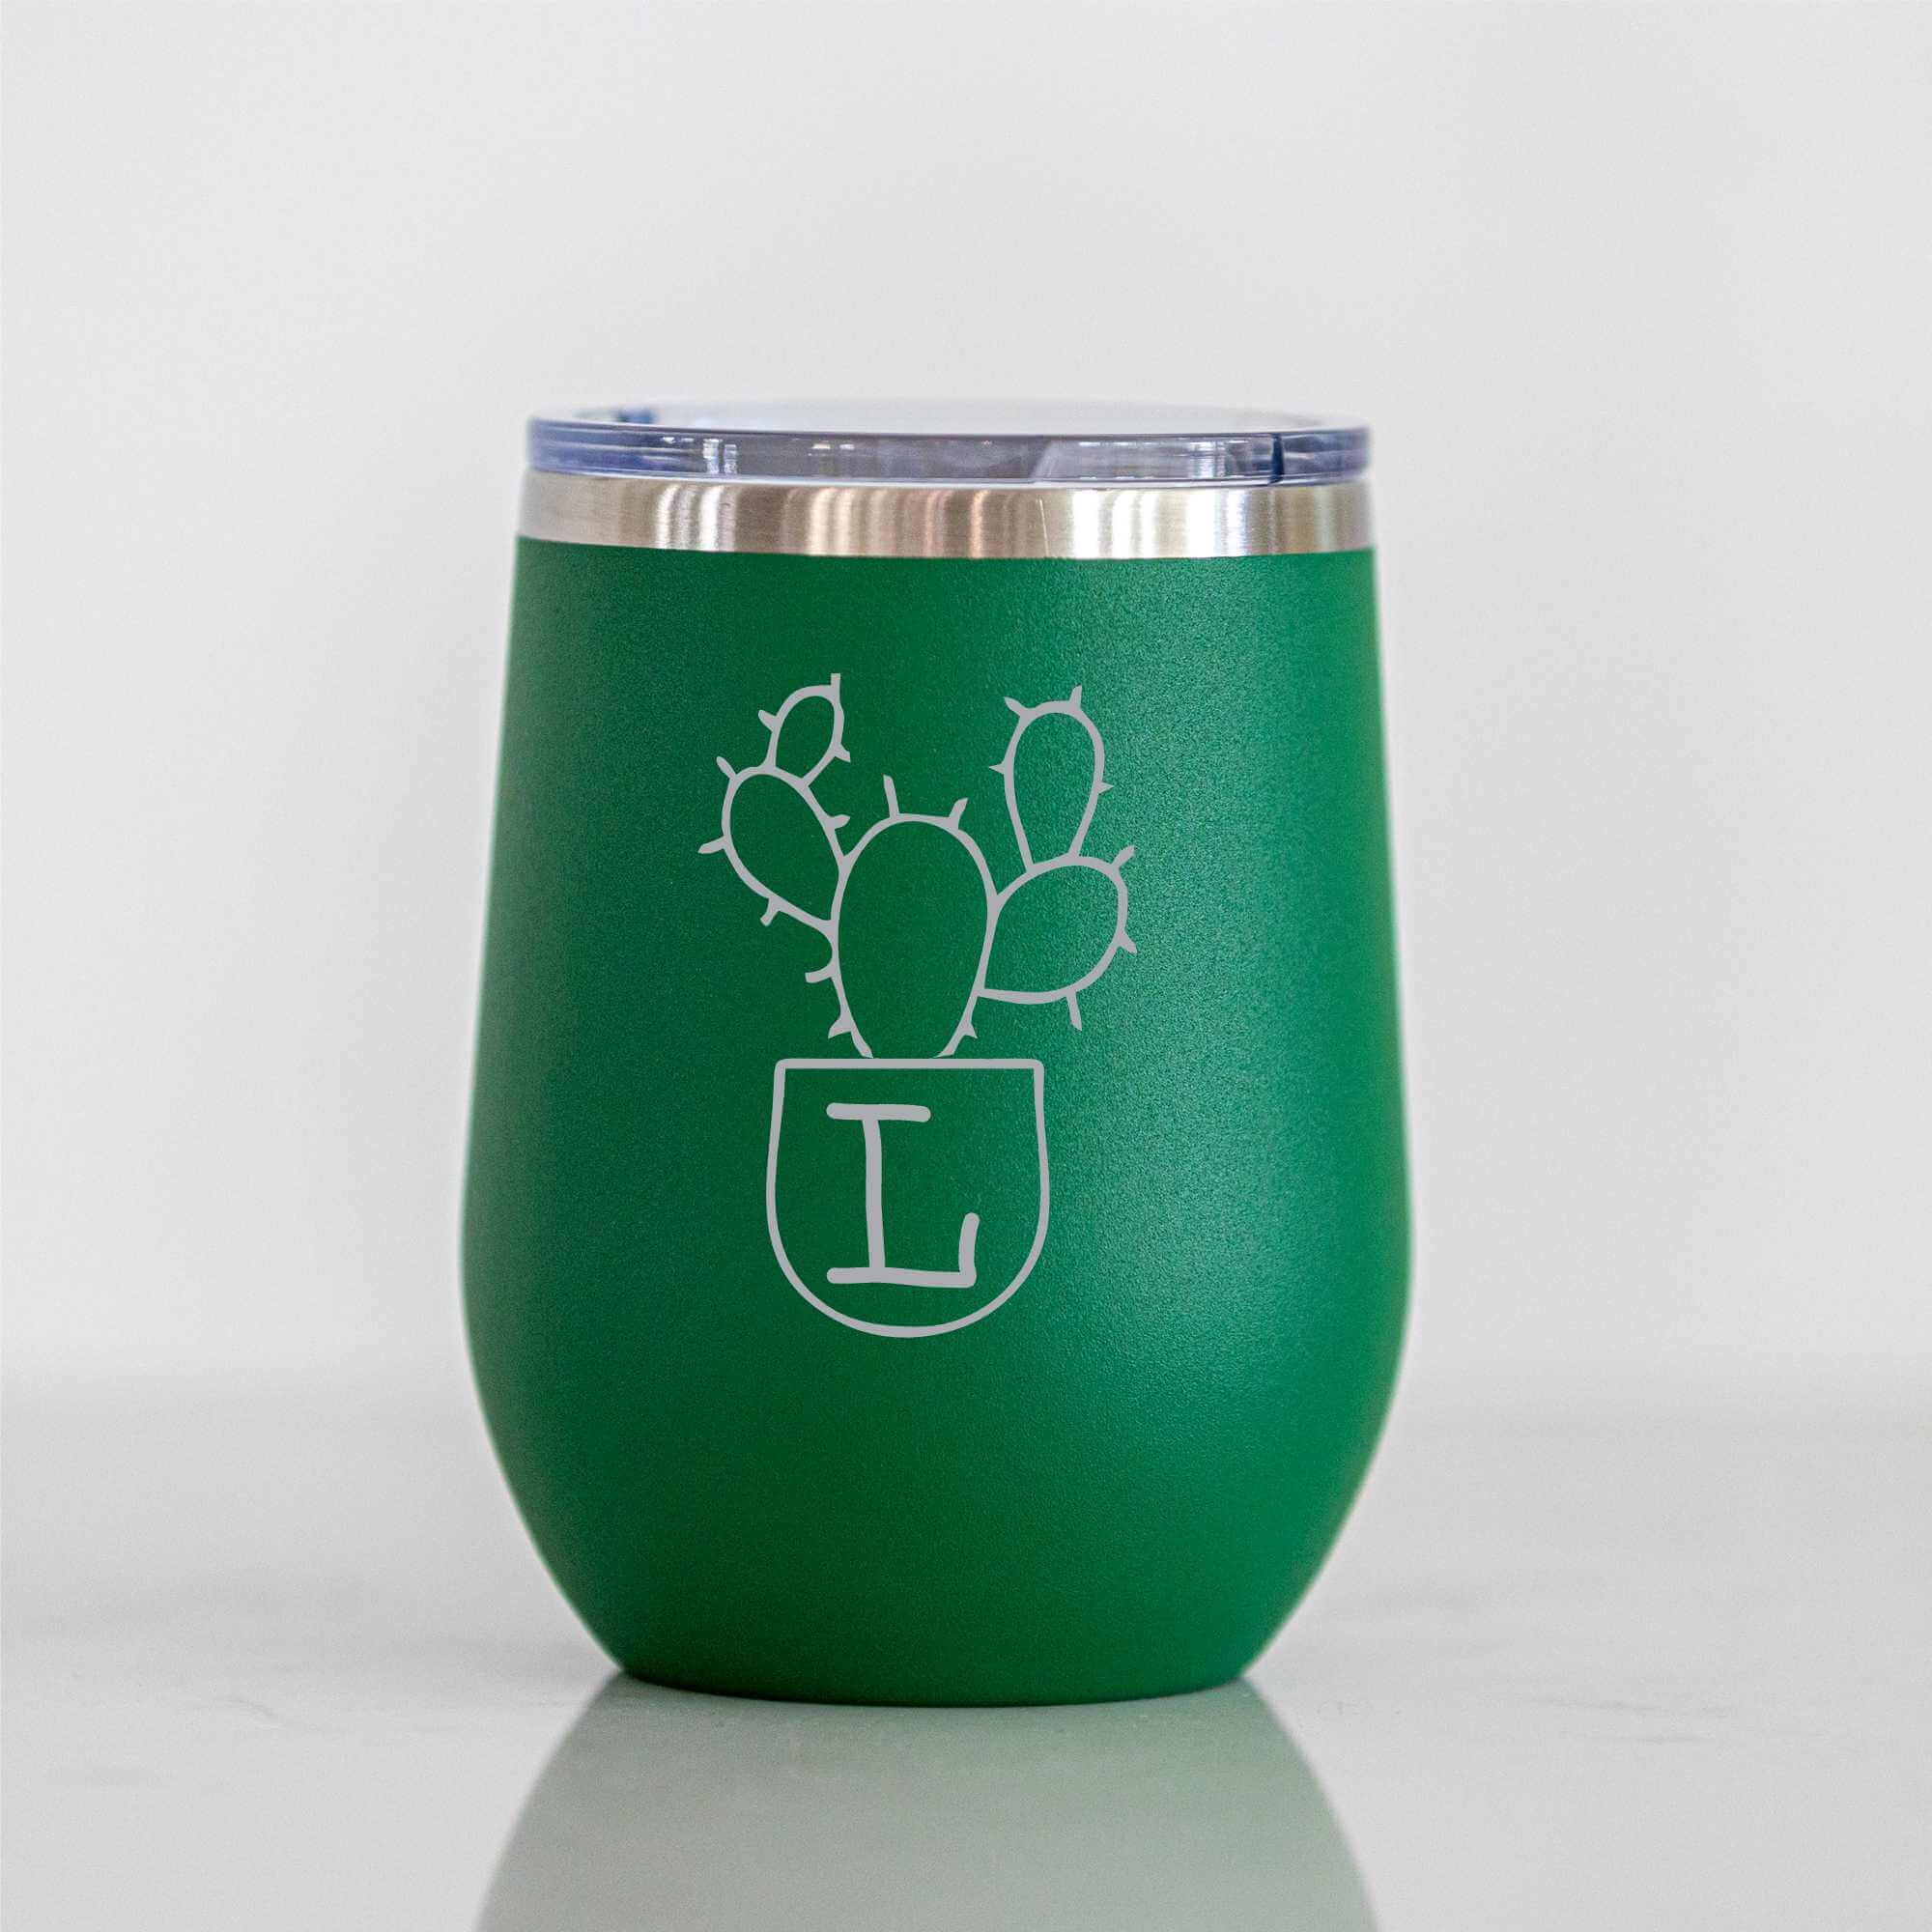 Personalized 12 oz Insulated Stemless Wine Tumbler - Custom Engraved and Monogrammed (Green)